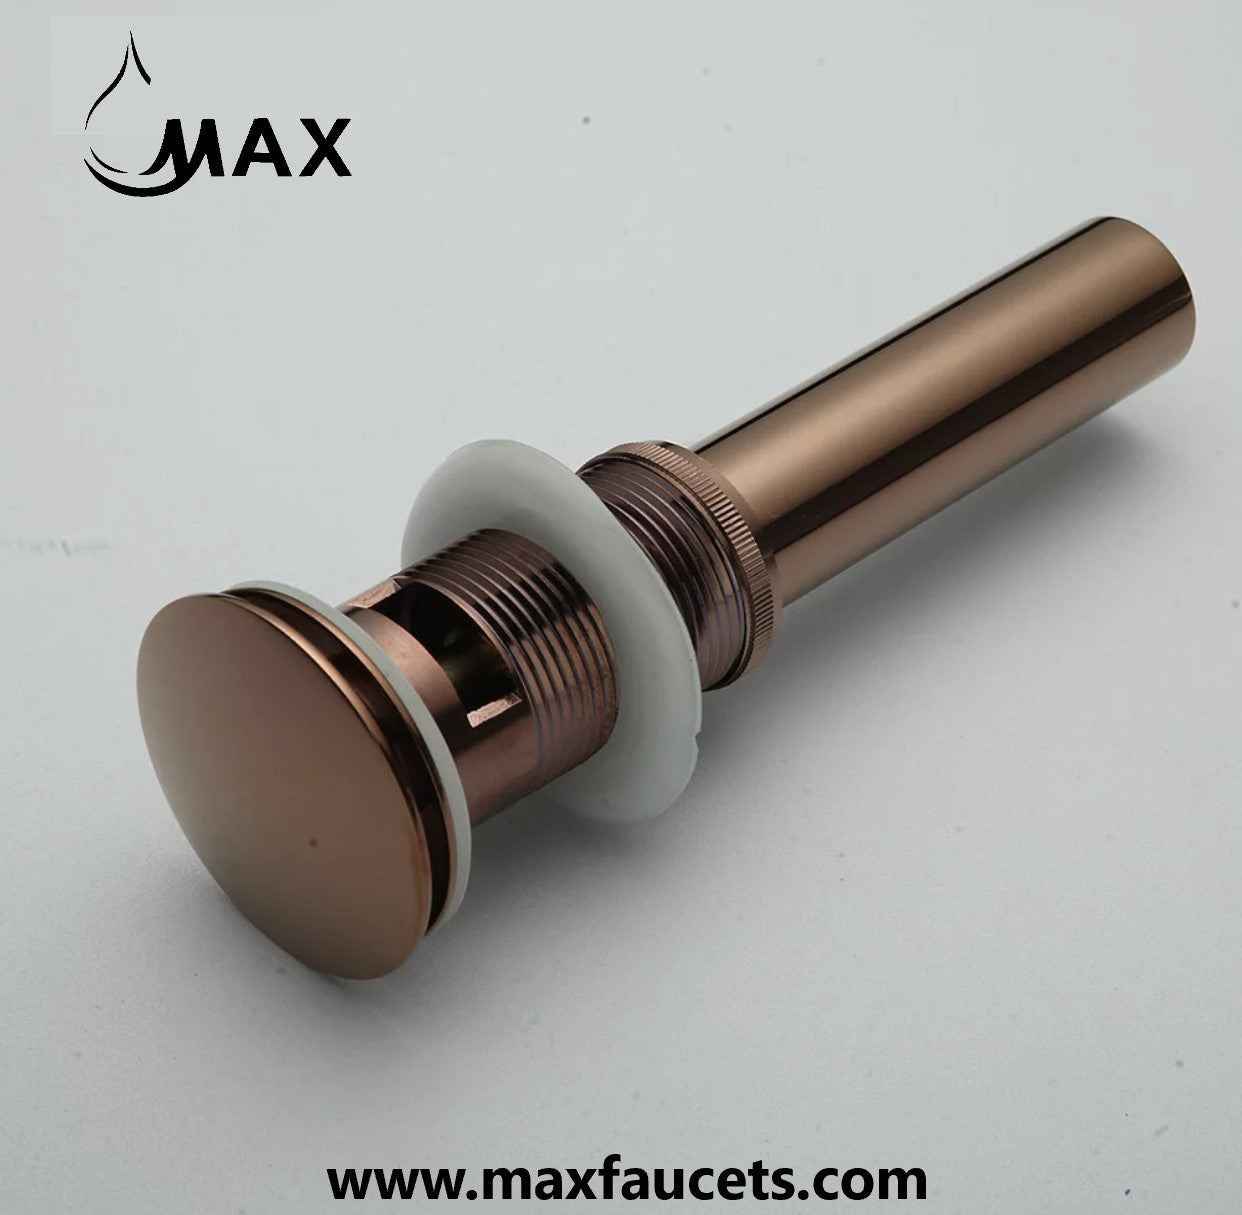 Metal Push Pop Up Sink Drain With Overflow Rose Gold Finish